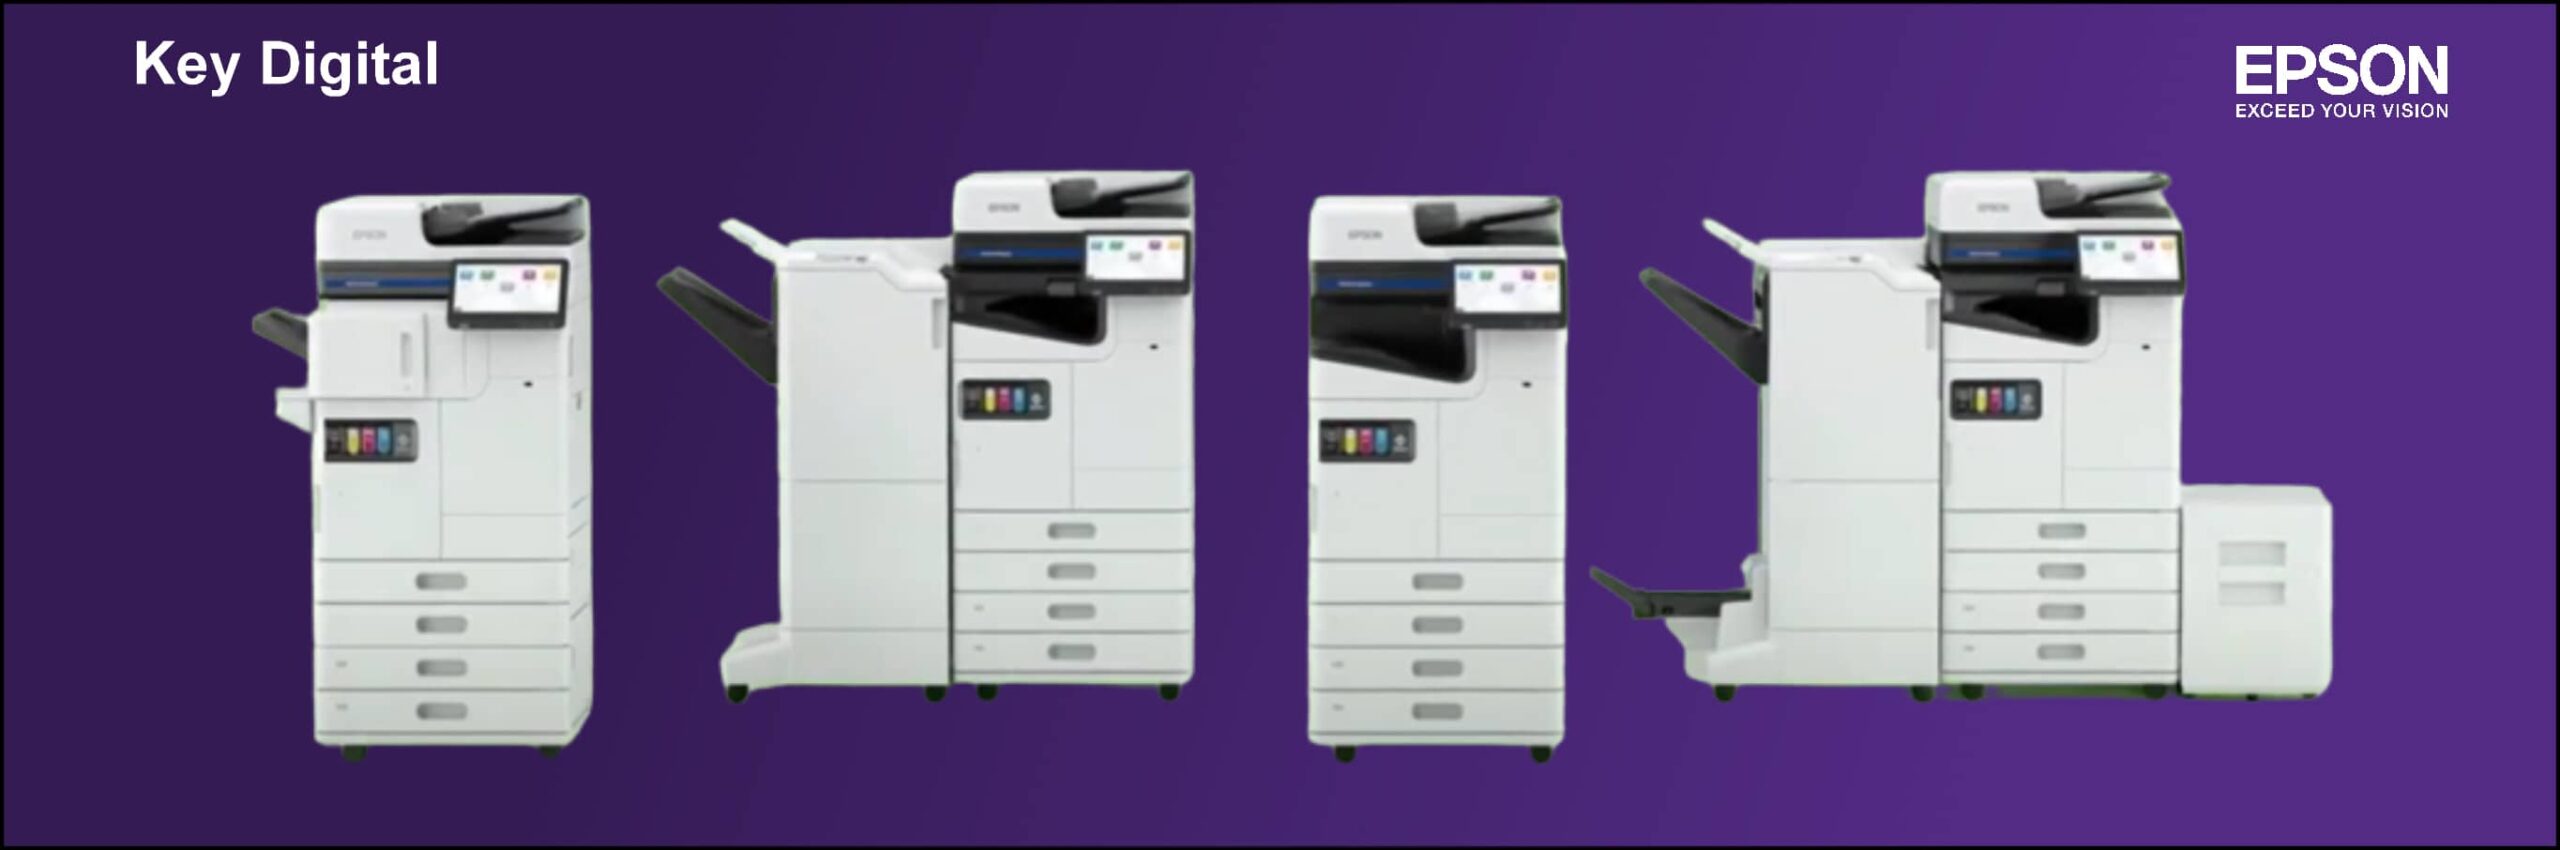 Epson Reinforces Commitment to Heat-Free Inkjet Technology and